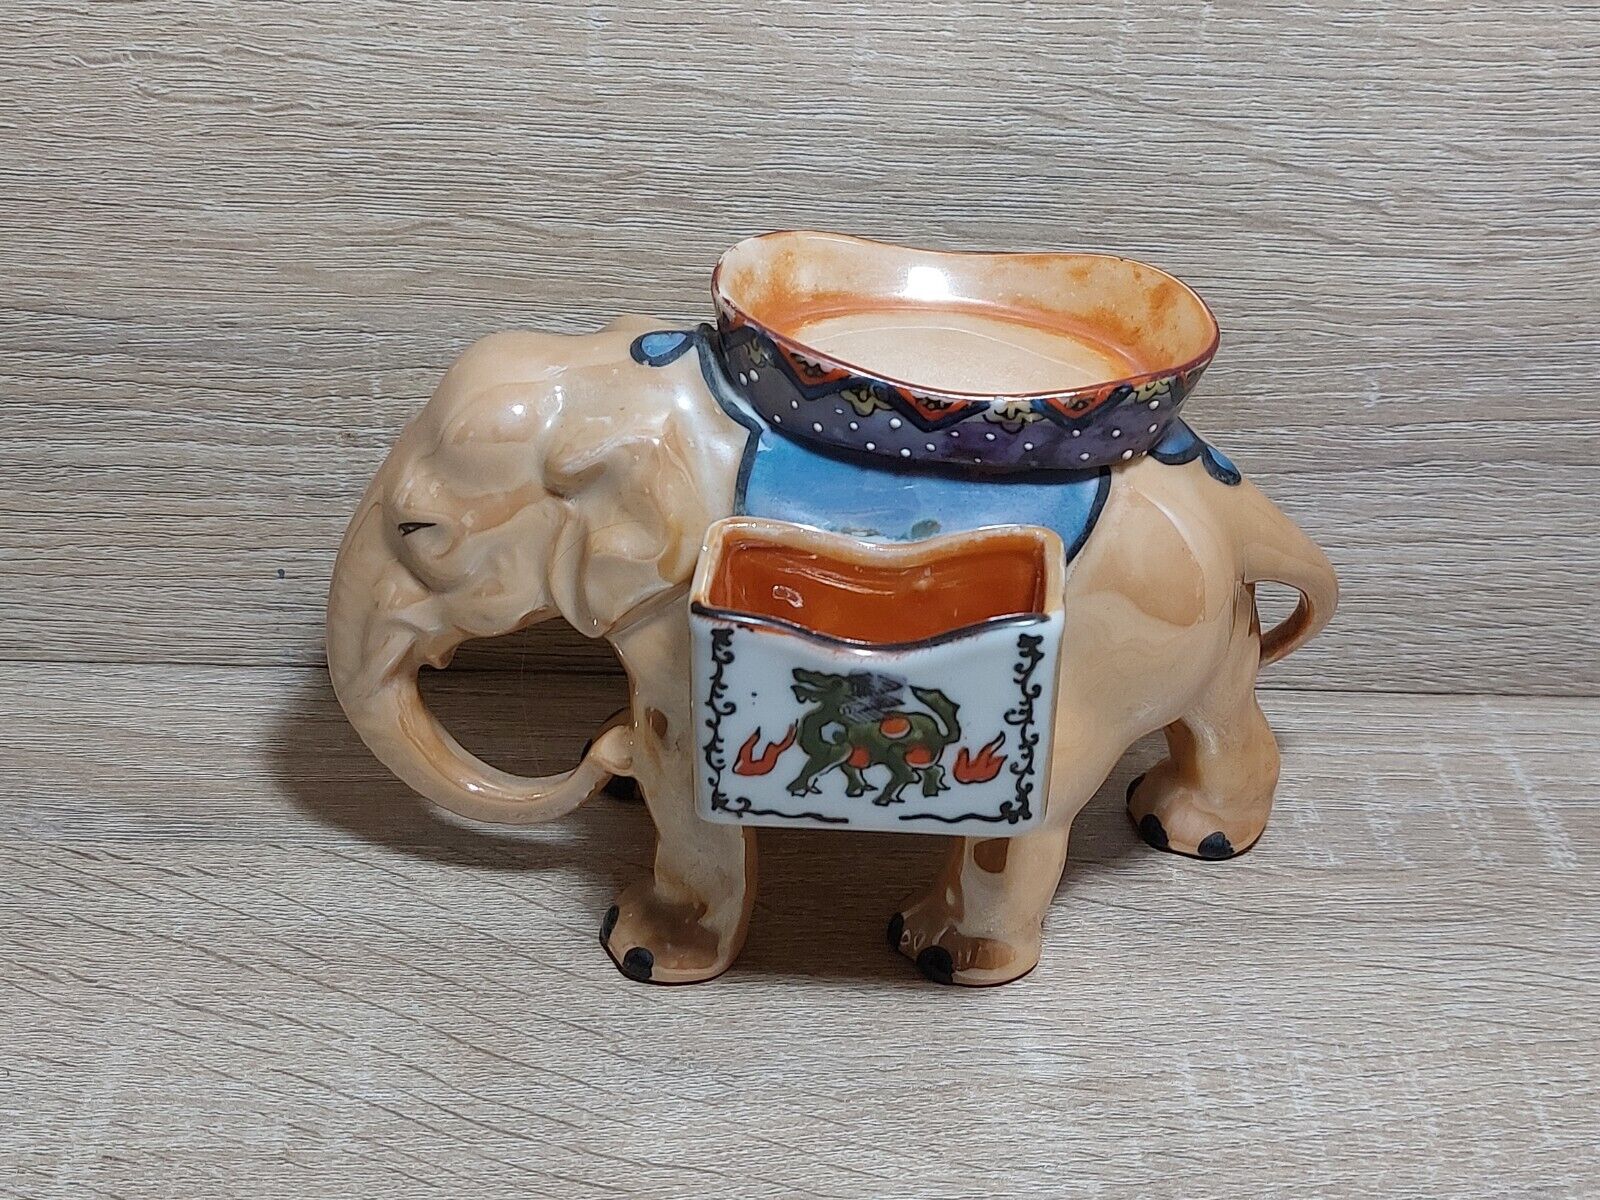 Decorative Brown Ceramic Elephant Ashtray And Cigarette Holder Made In Japan